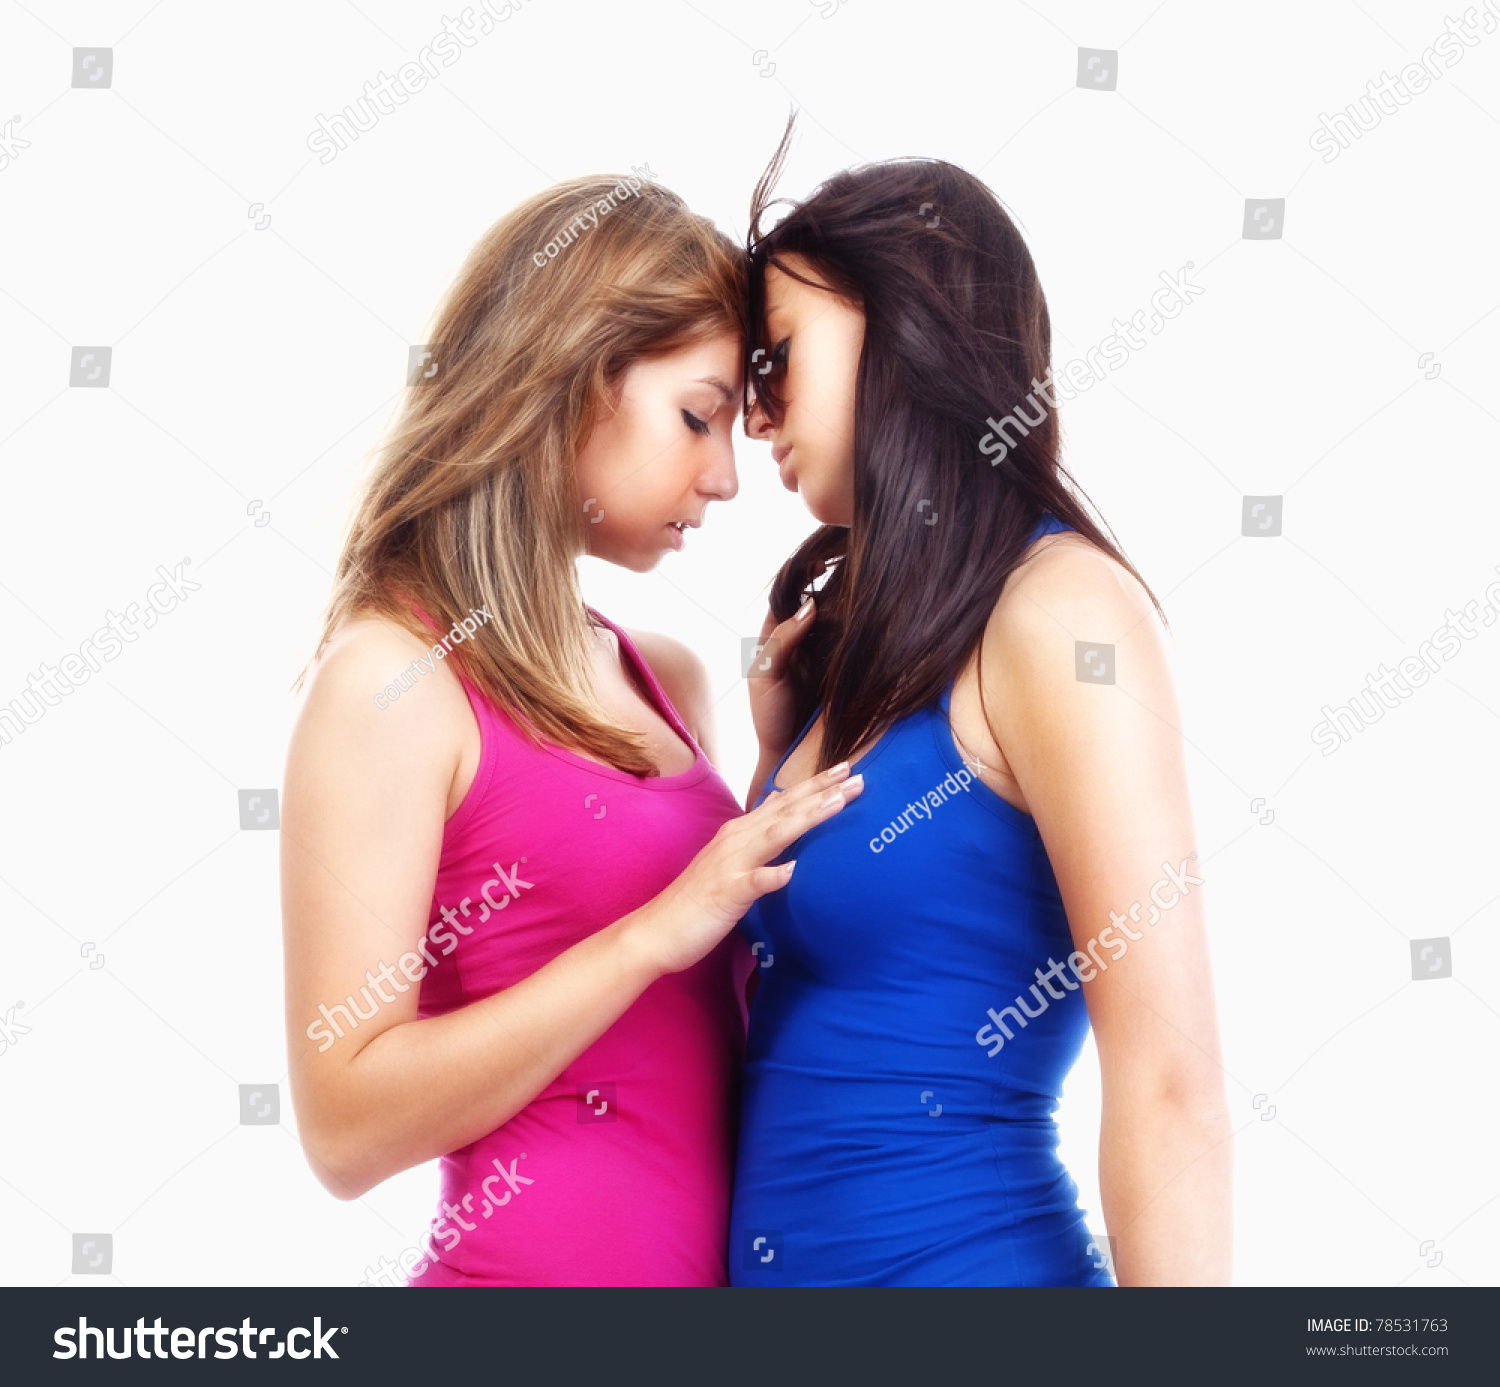 Lesbians touching each other